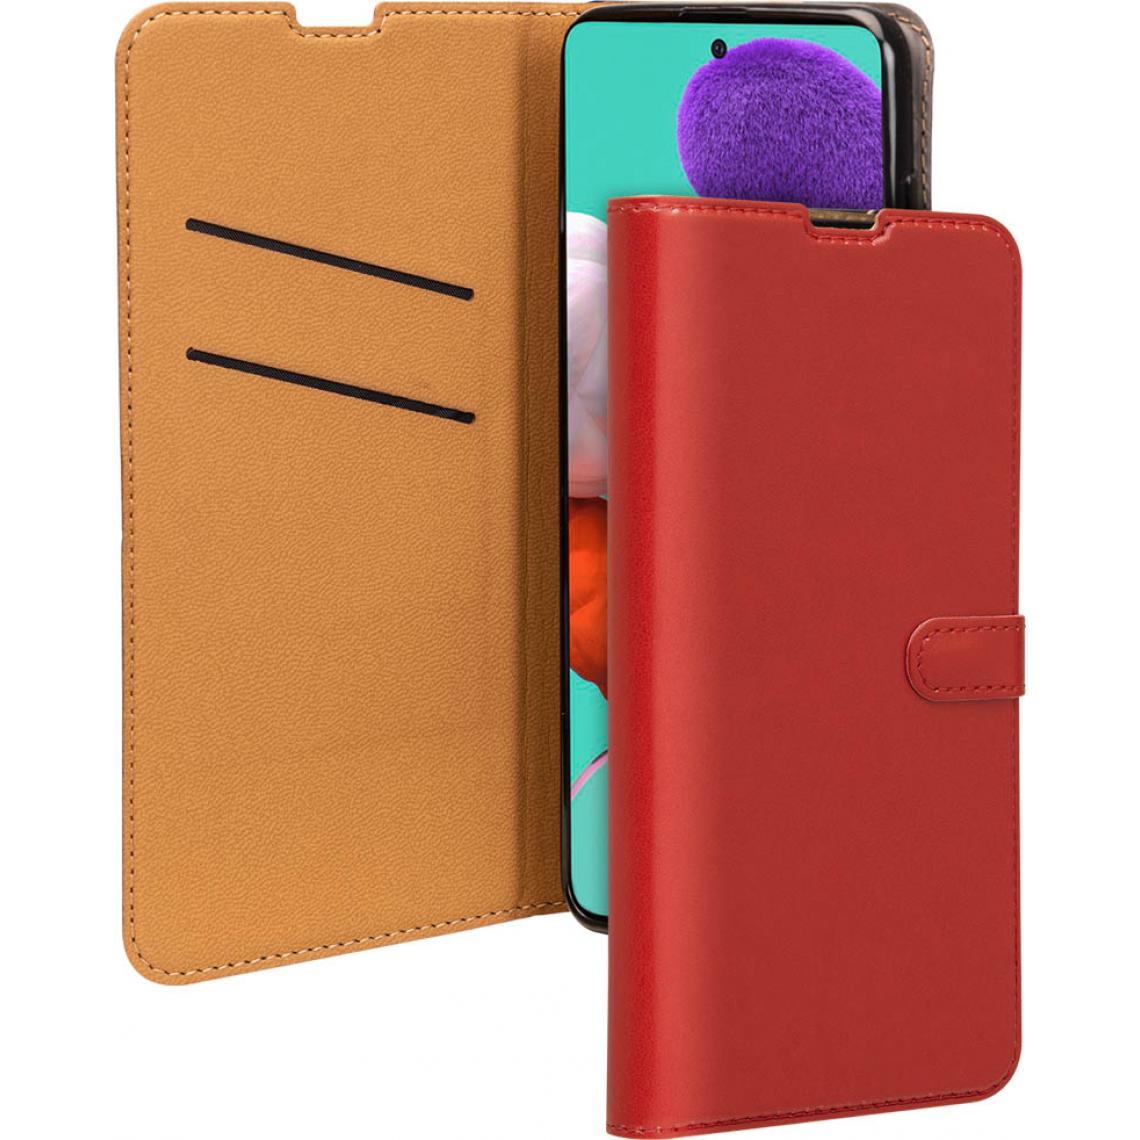 Bigben Connected - BIGBEN CONNECTED FOLIOGA51R - Folio Wallet Galaxy A51 Rouge - Coque, étui smartphone